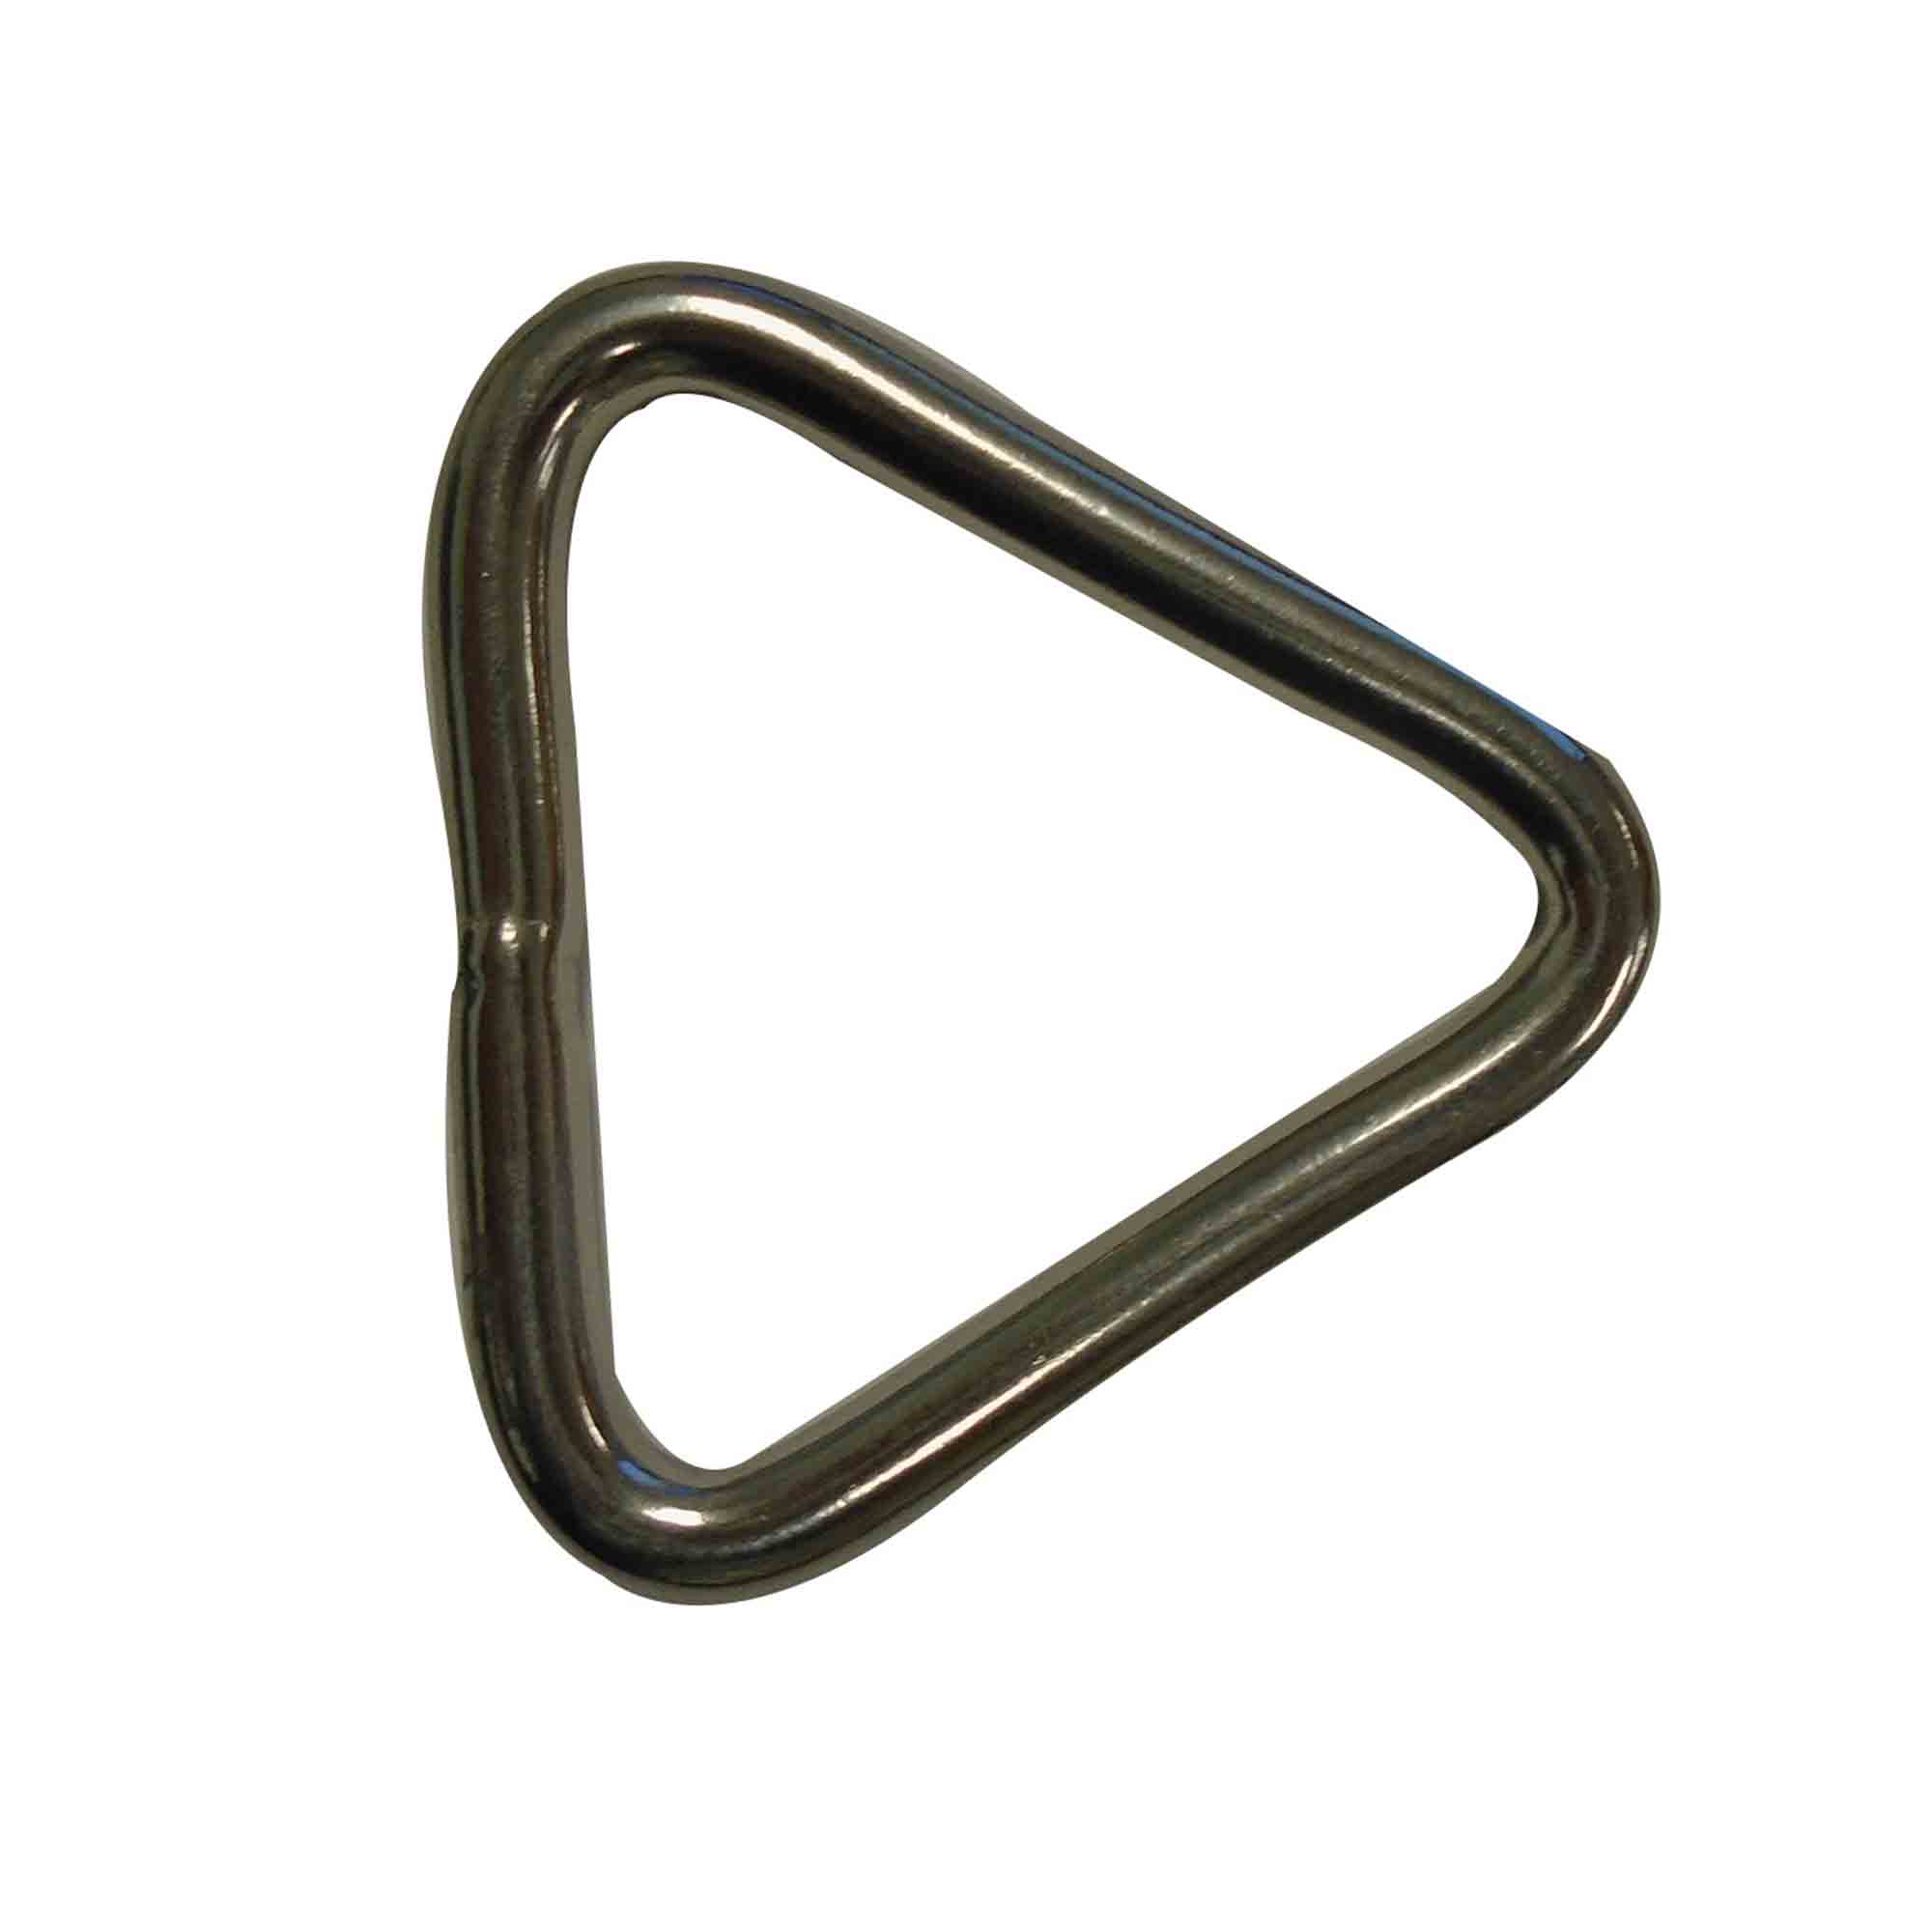 Stainless Steel Triangle, 1/4" x 2", 4-Pack - FO3808-M4